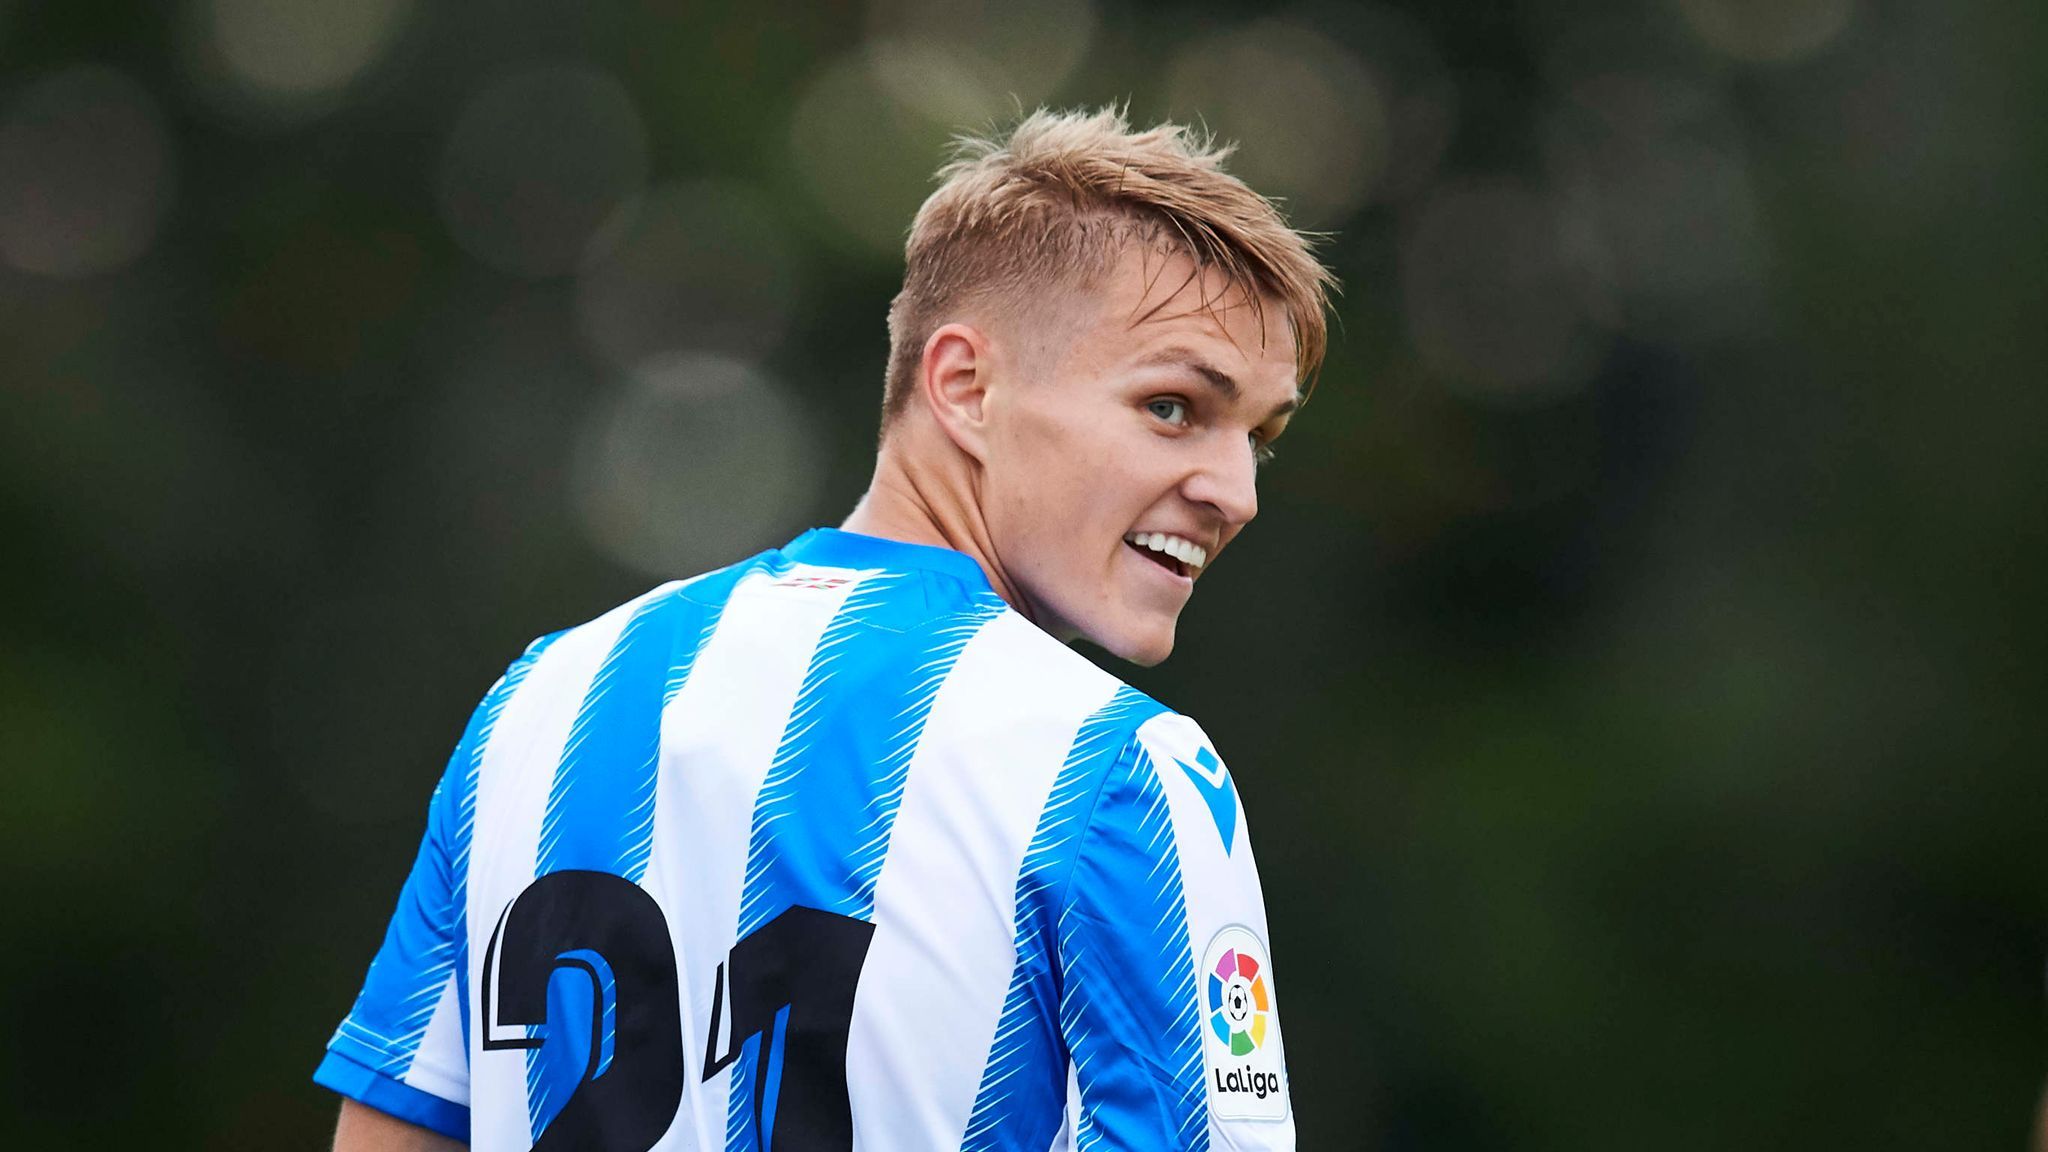 Transfer talk: Arsenal set to sign Martin Odegaard on loan from Real Madrid. Who Ate all the Pies